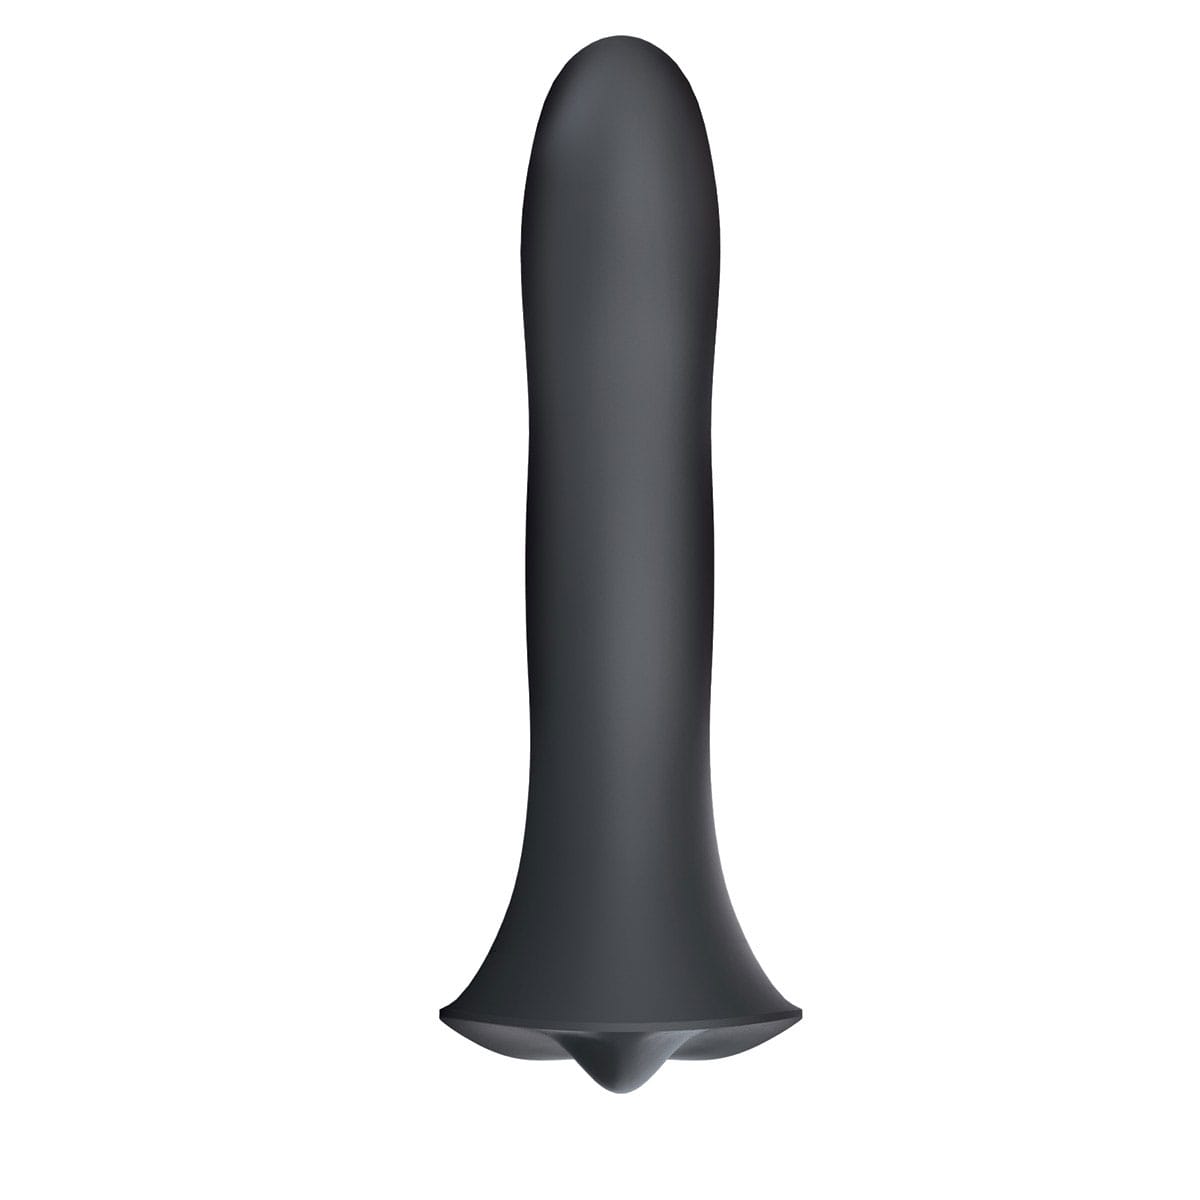 Buy Wet for Her Fusion Dil   Large   Noir Black 7.4 long and 1.61 thick dildo made by Wet For Her.